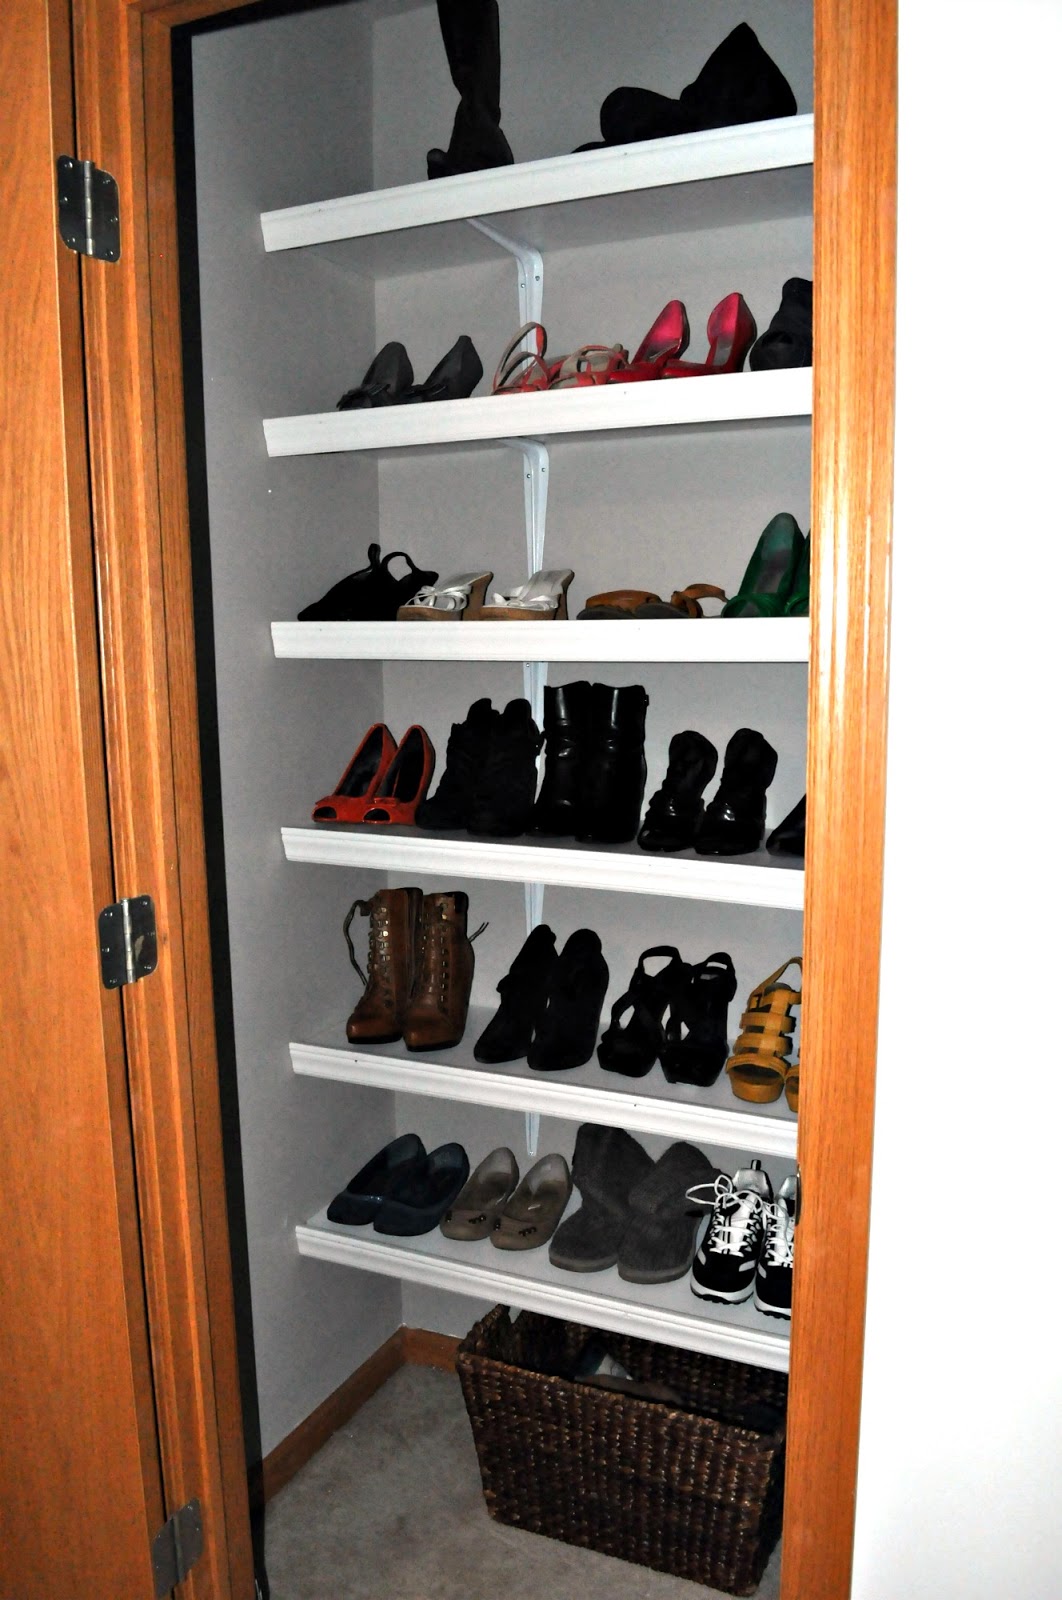 Now nothing fancy. Just a place for my shoes to live and I like it.